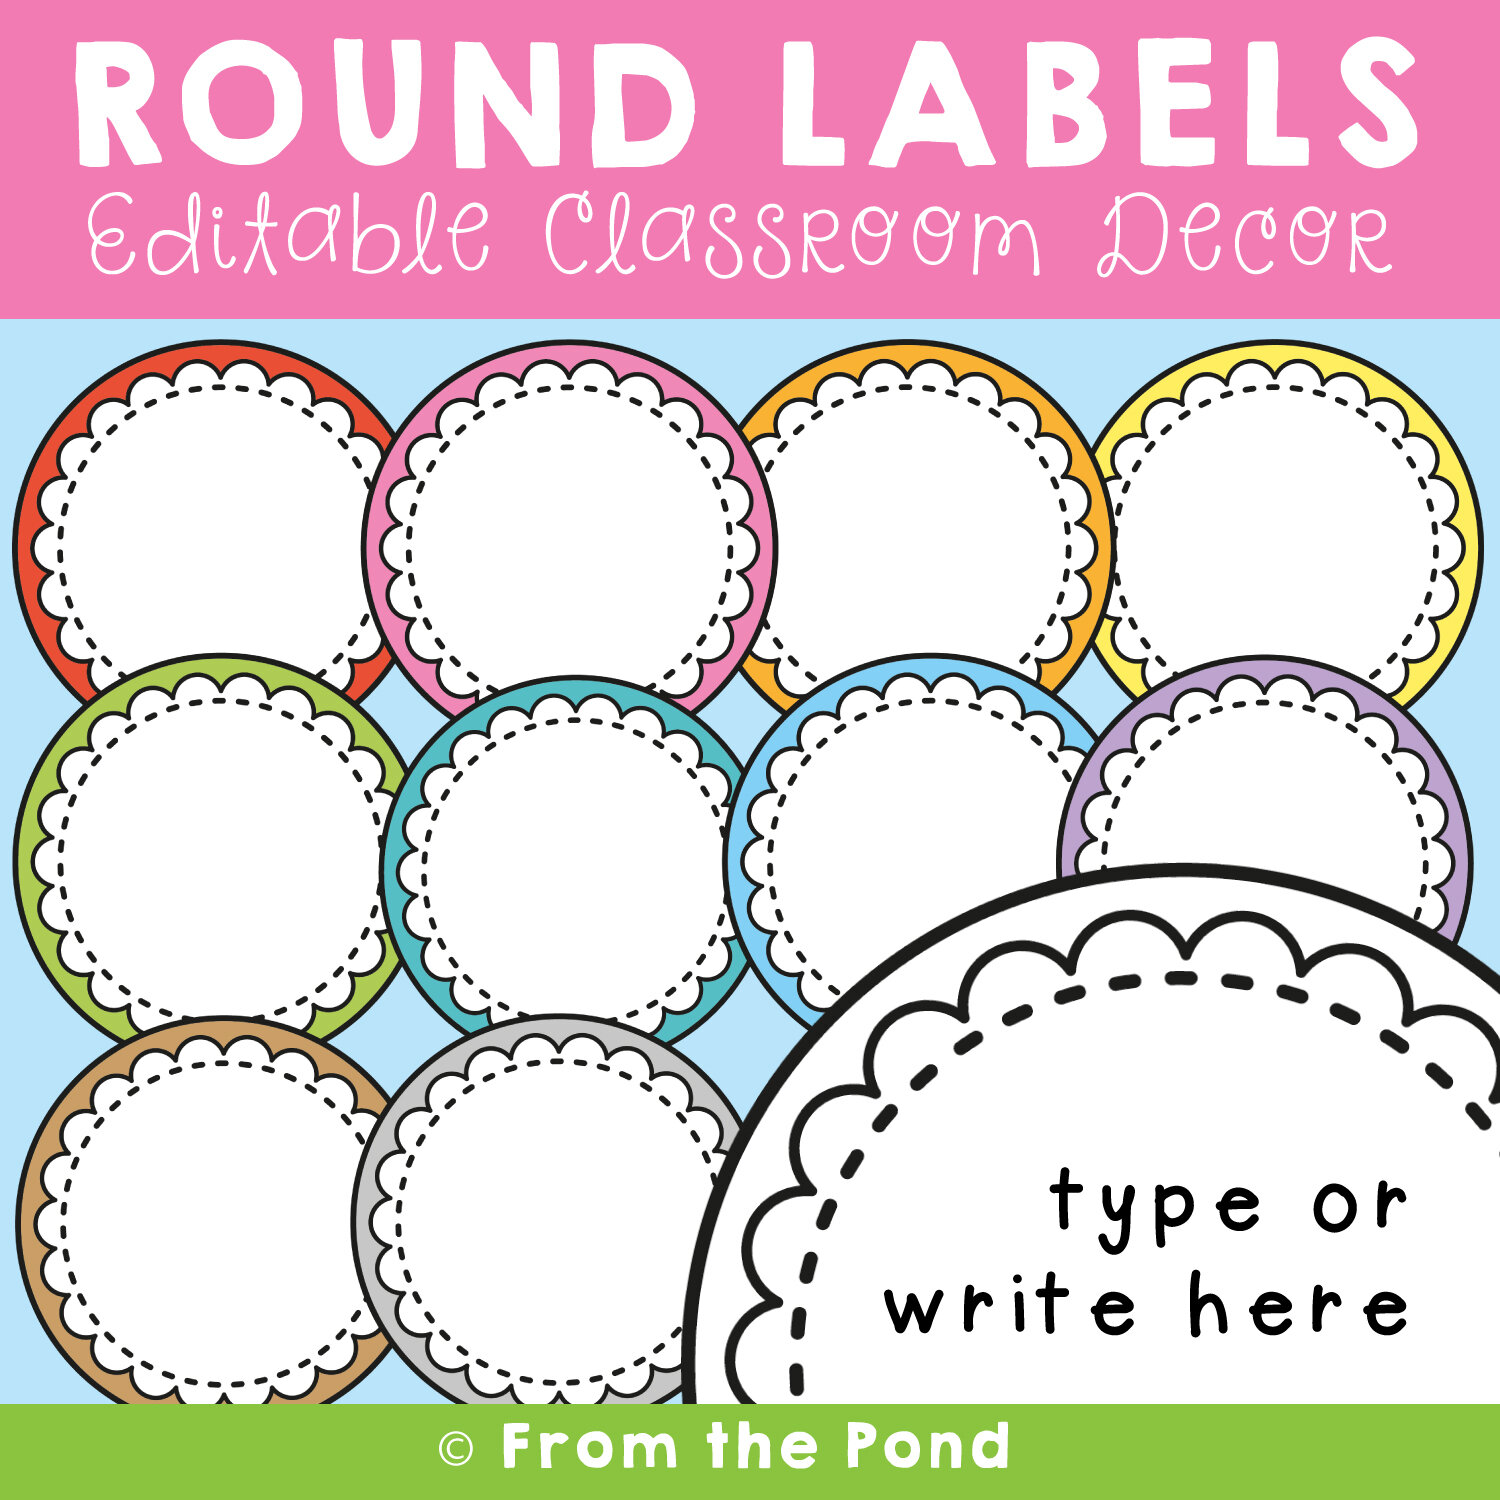 Classroom Labels. Class rounded